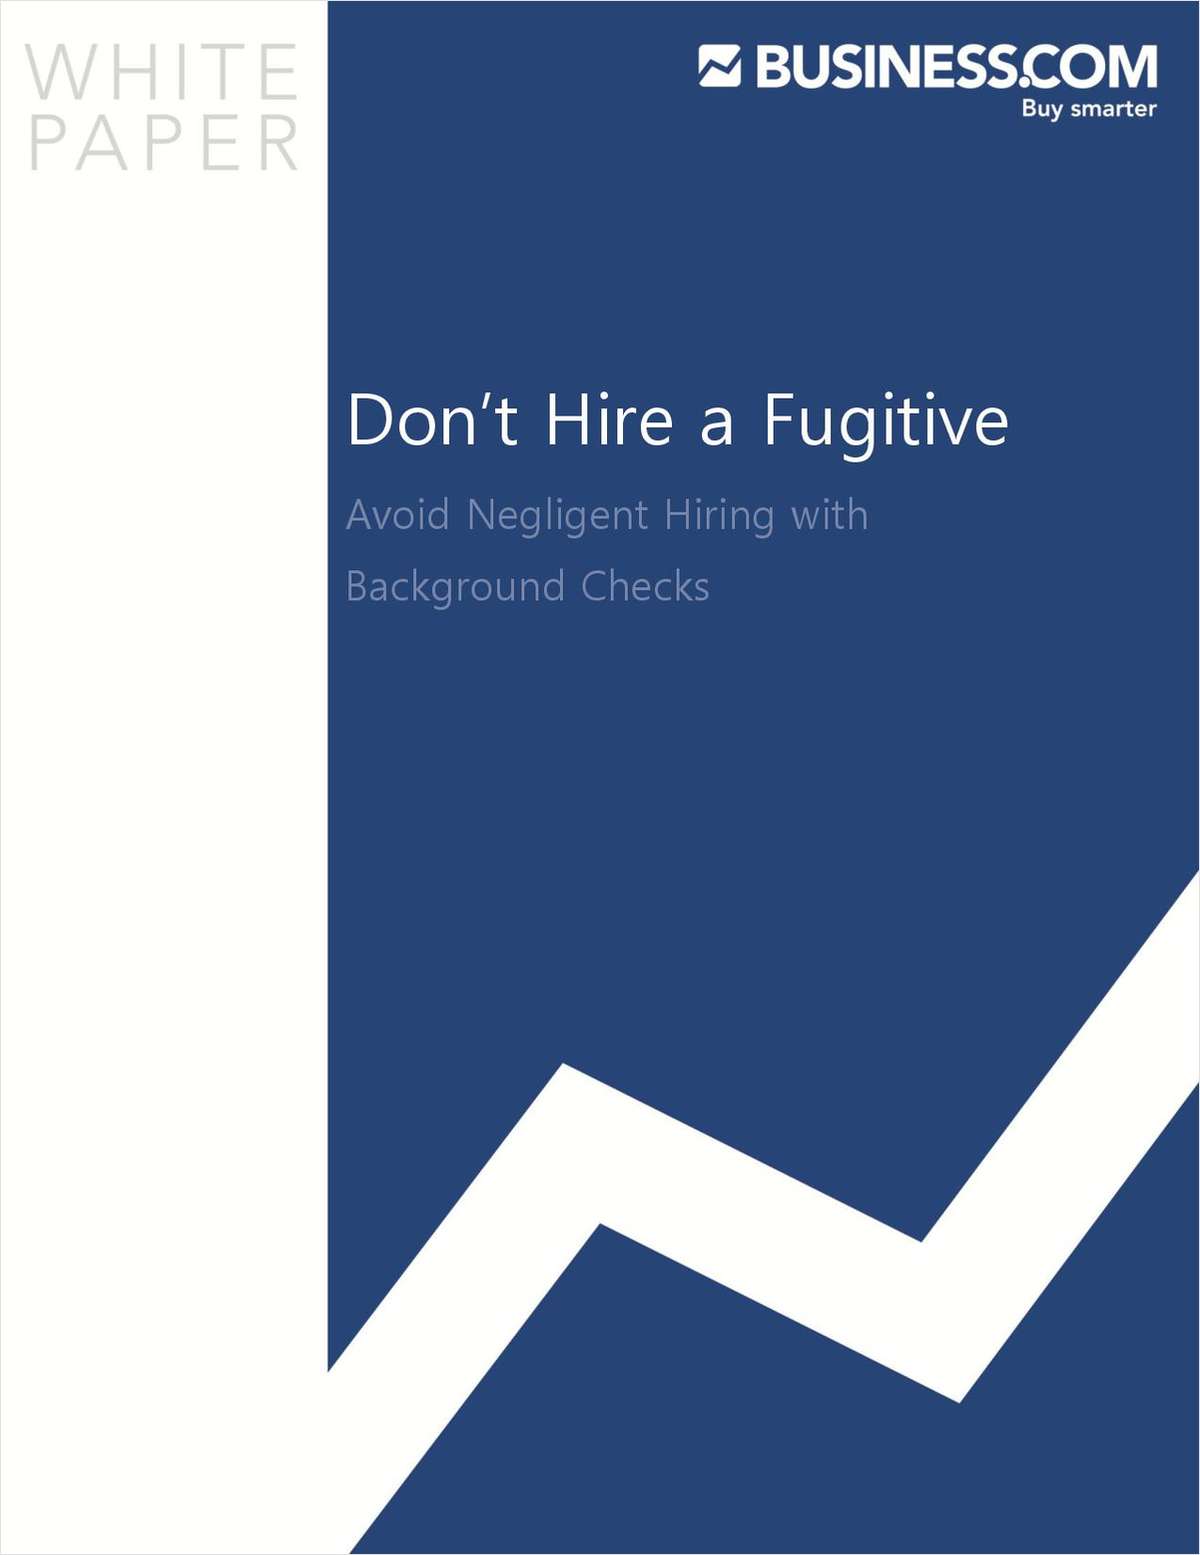 Avoid Negligent Hiring with Background Checks